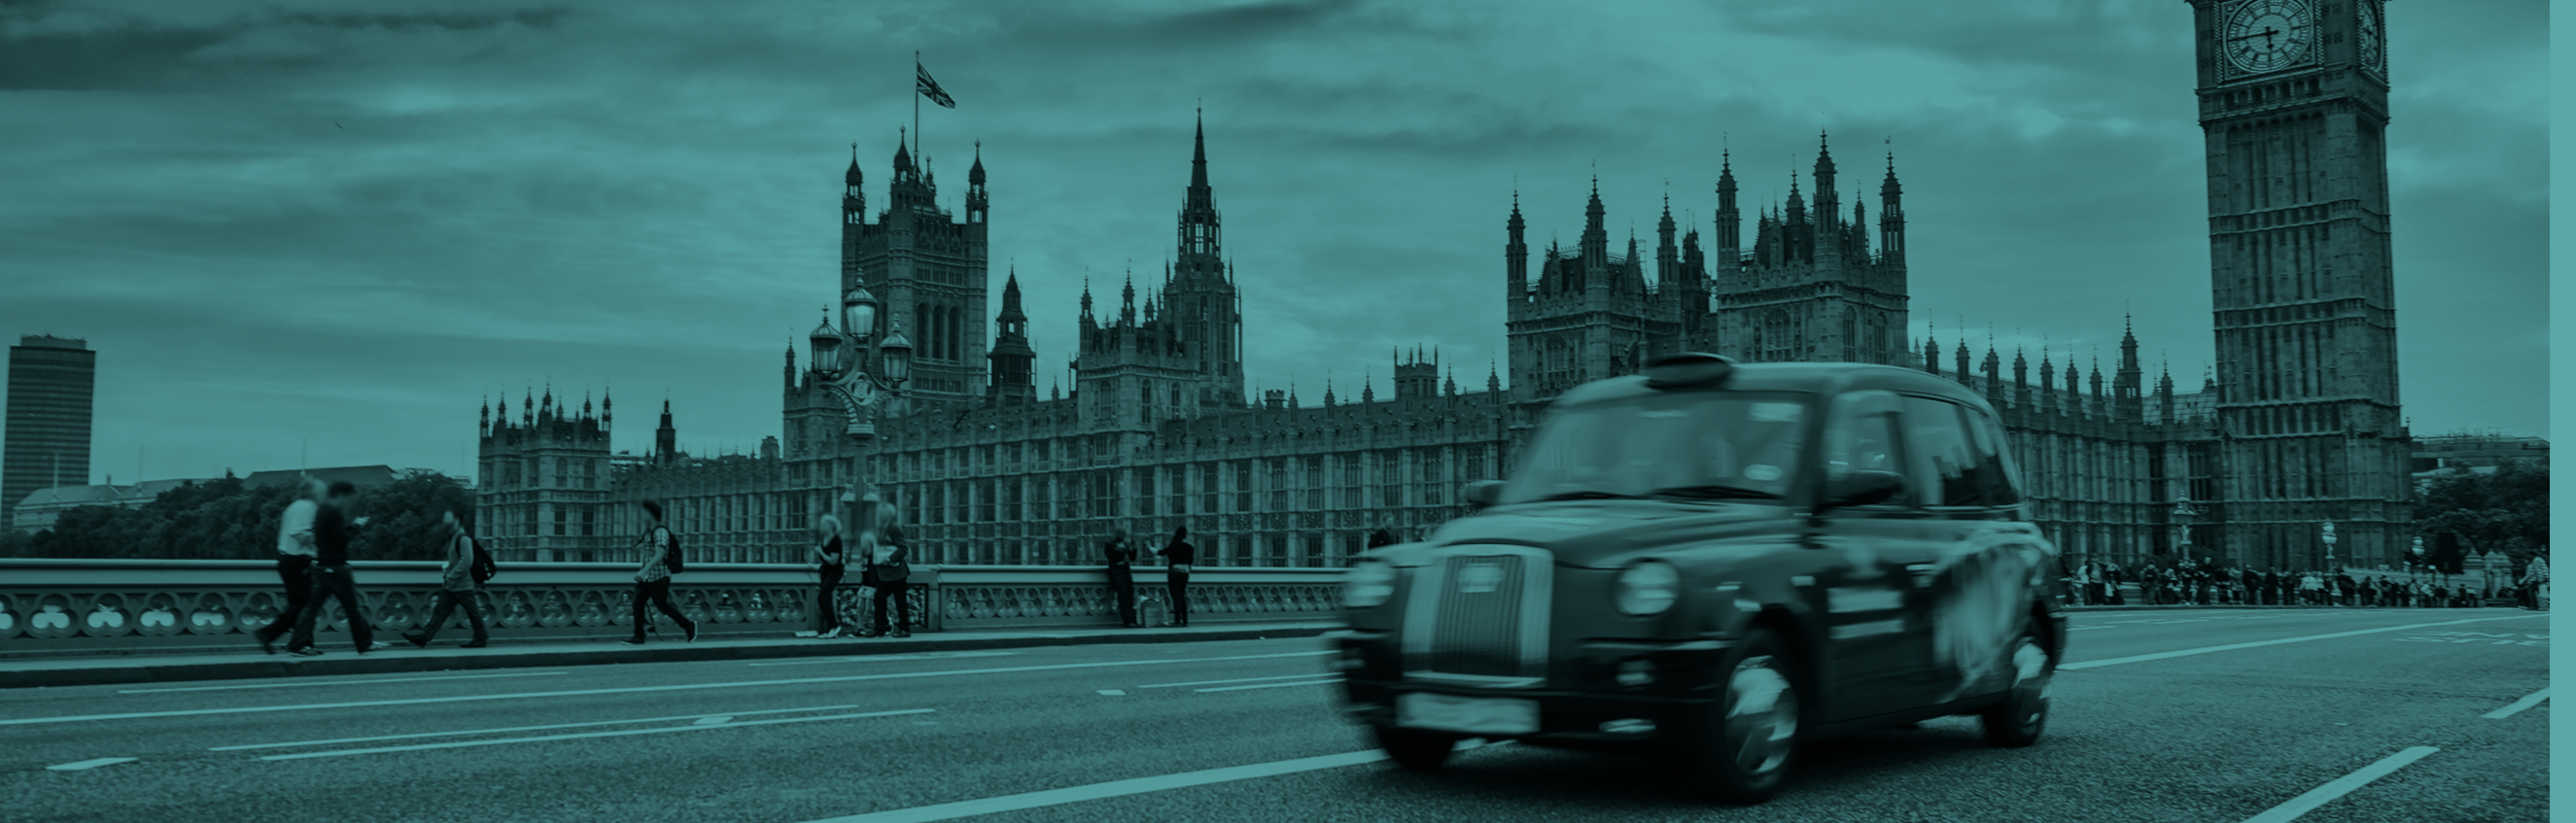 Taxi and Private Hire Regulation in the UK